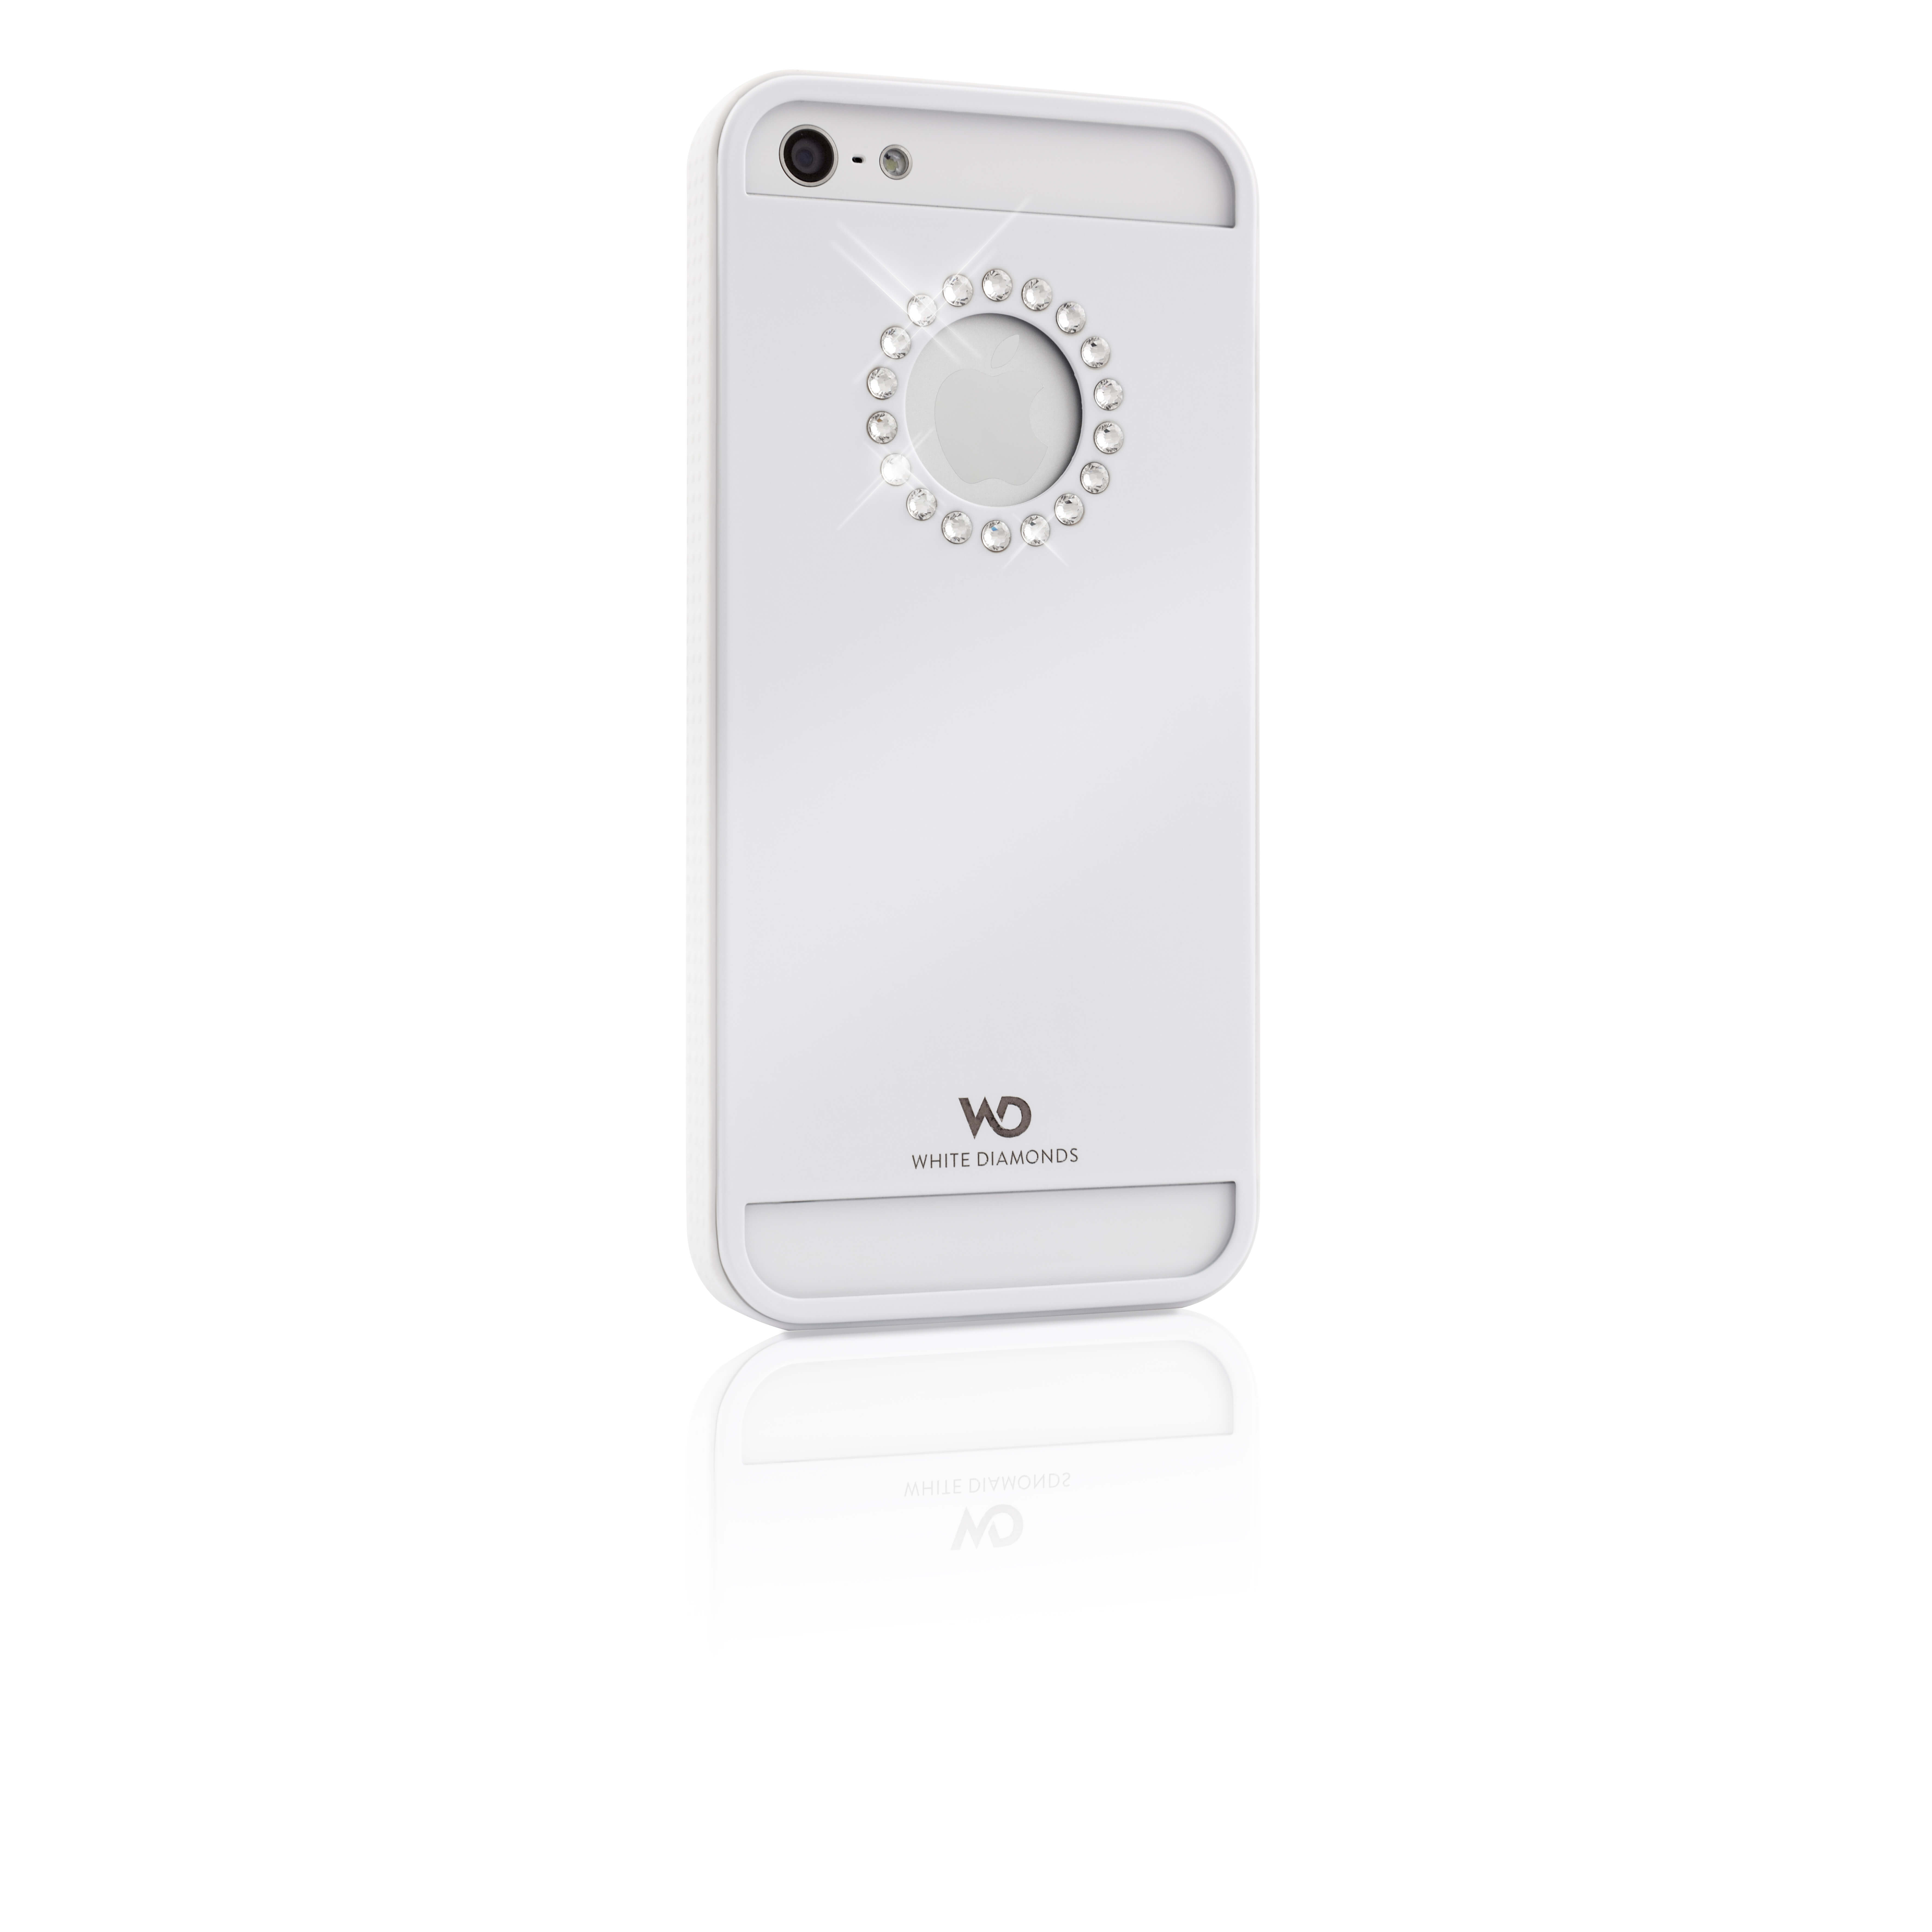 Mobile Phone Cover Metal Flow er for iPhone 5, White